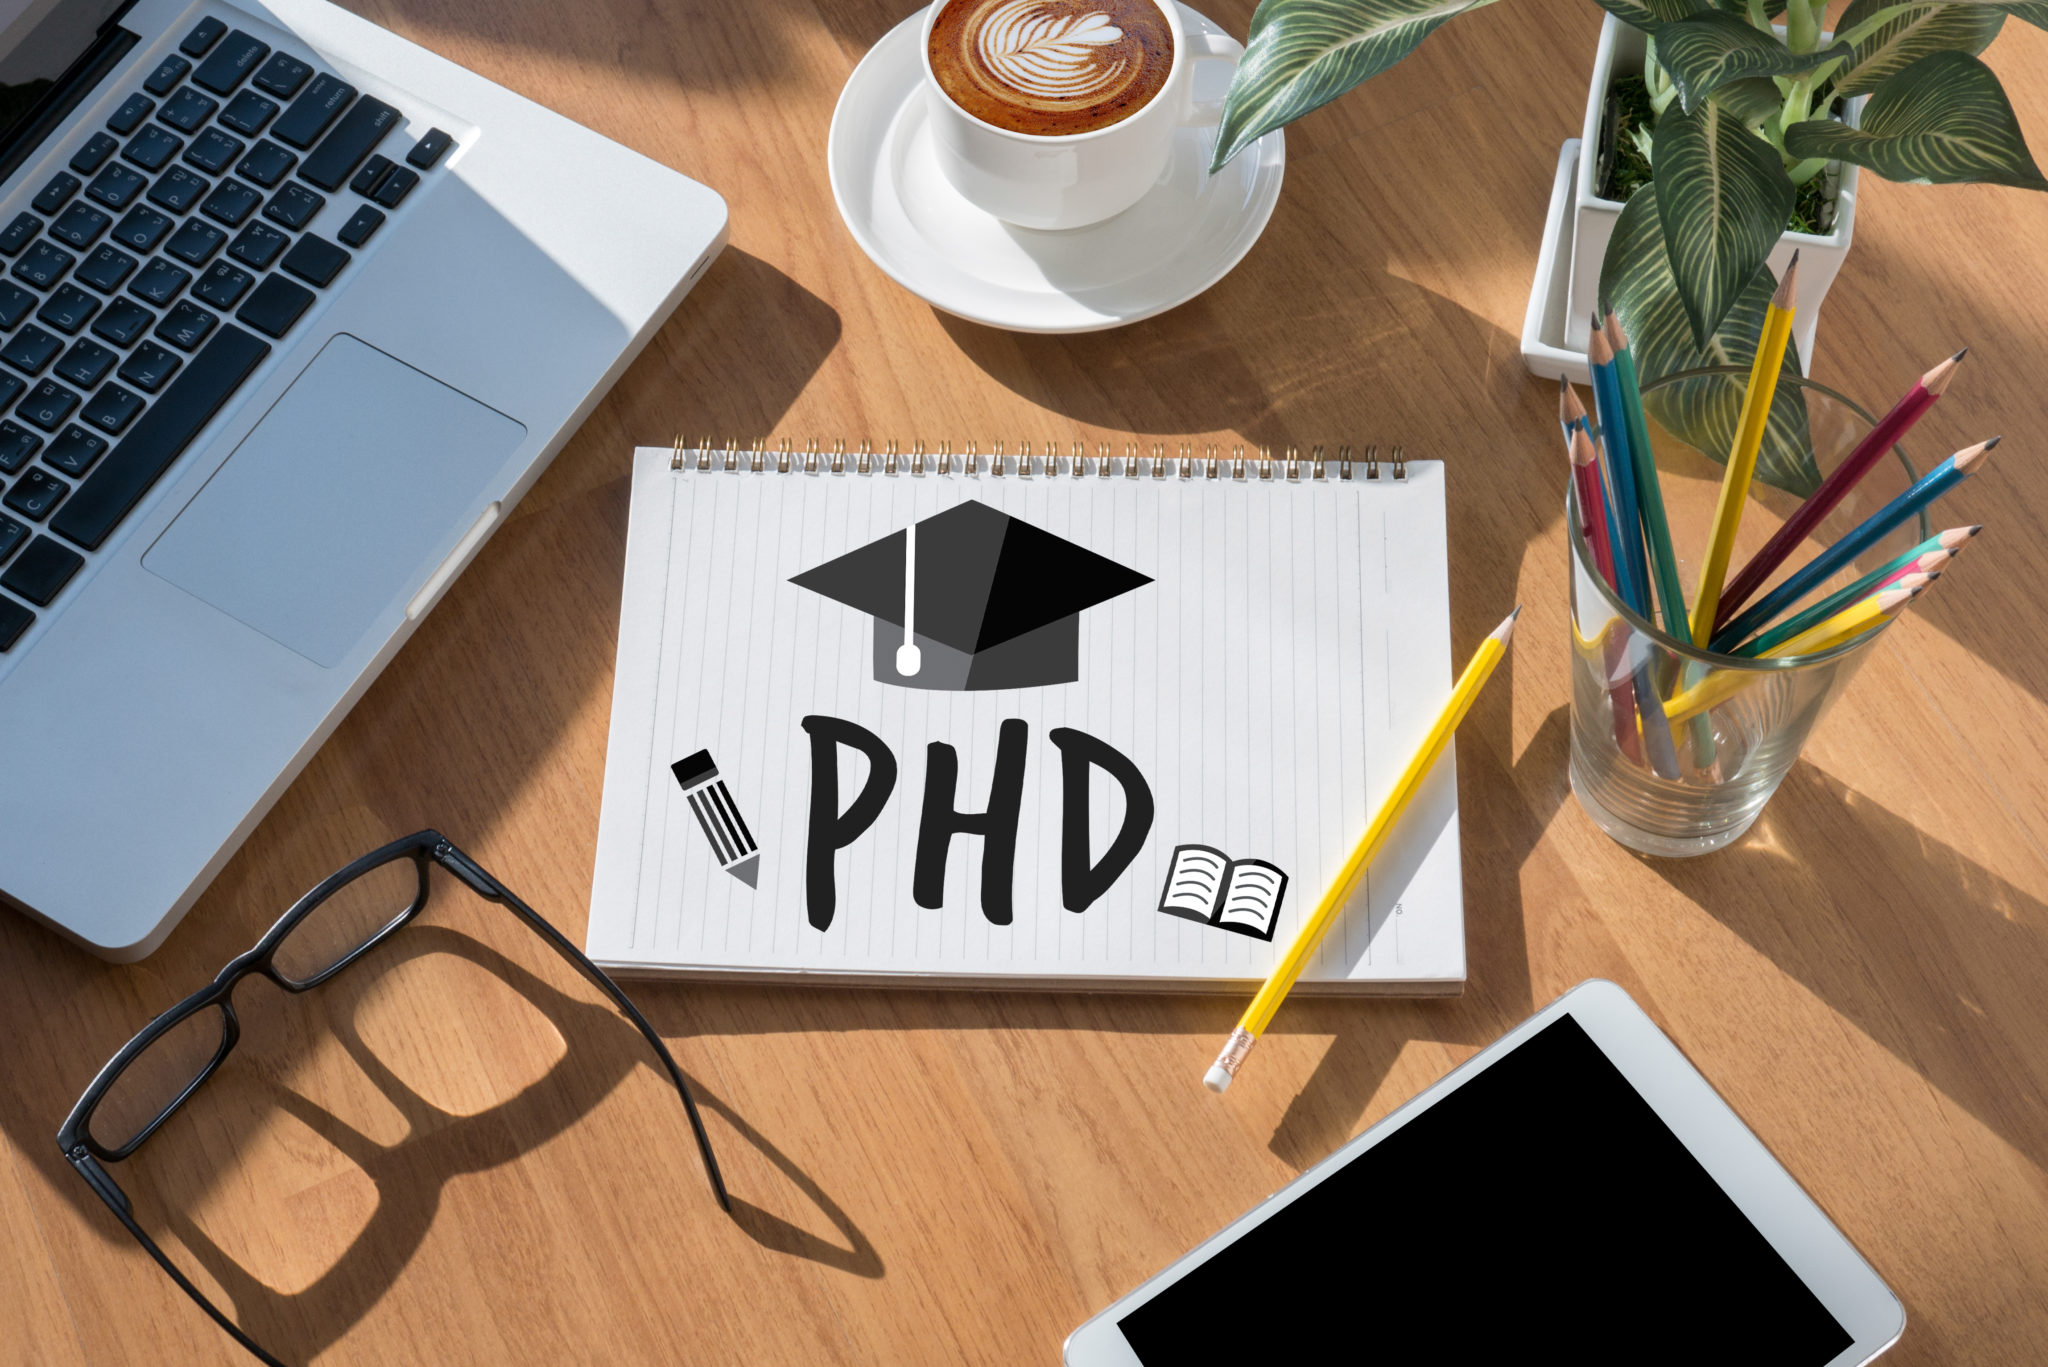 doctor degree and phd